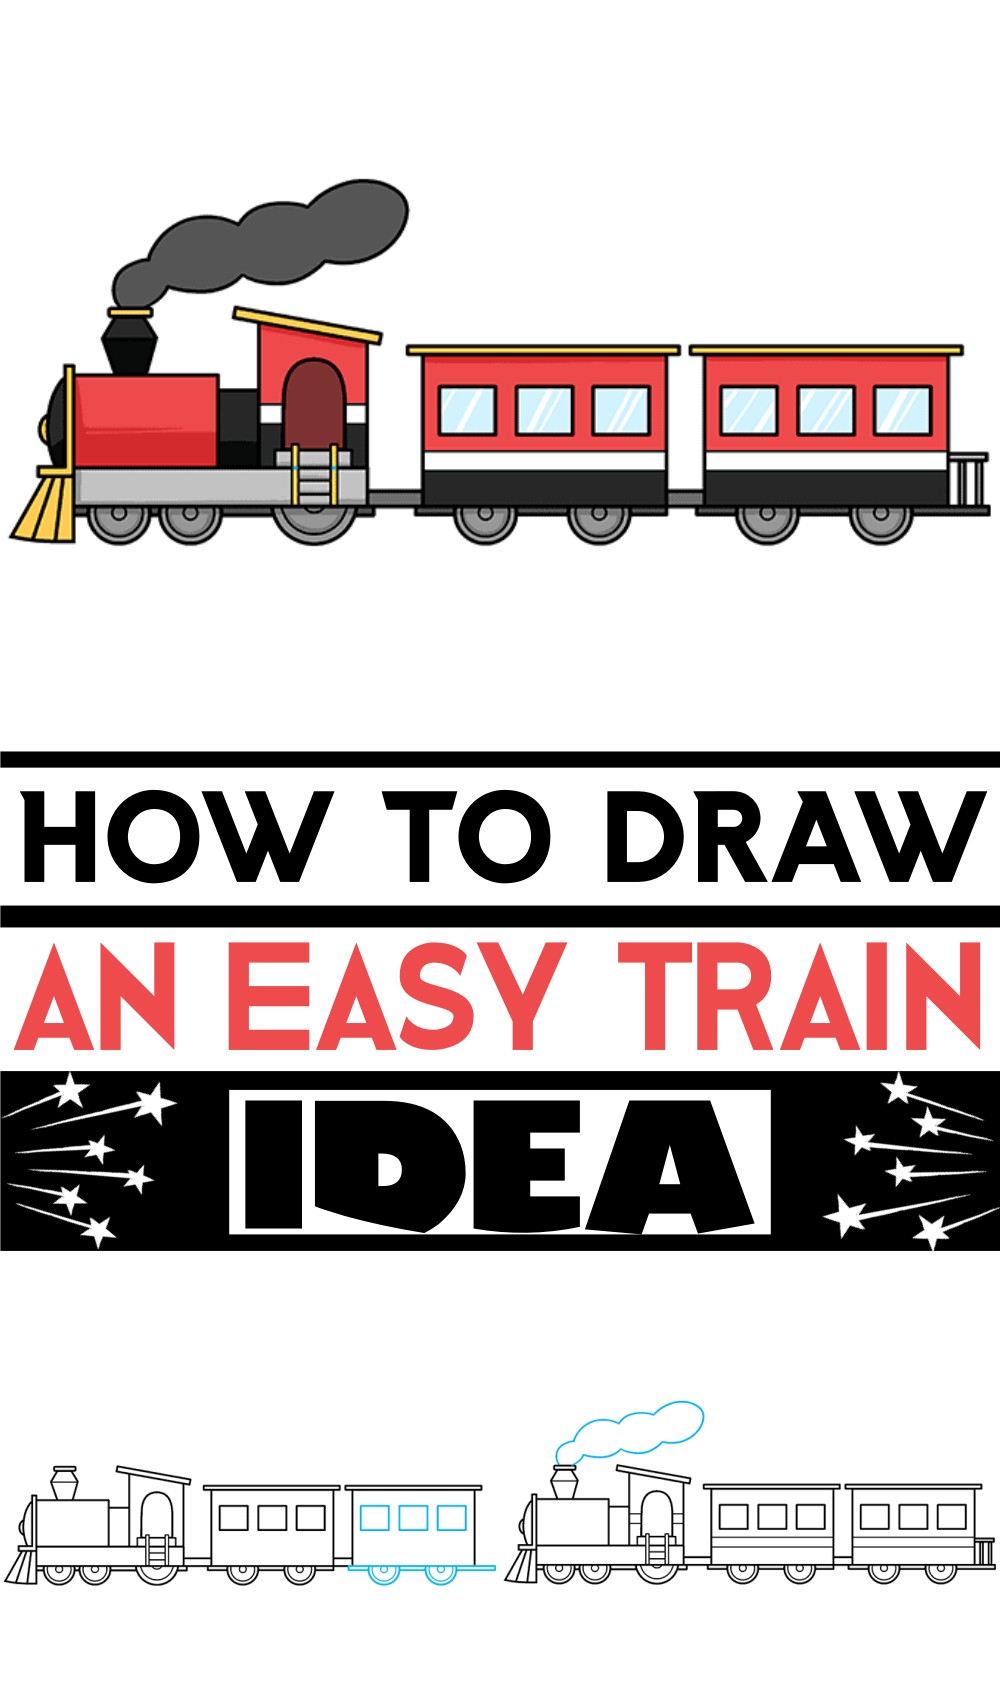 How To Draw An Easy Train